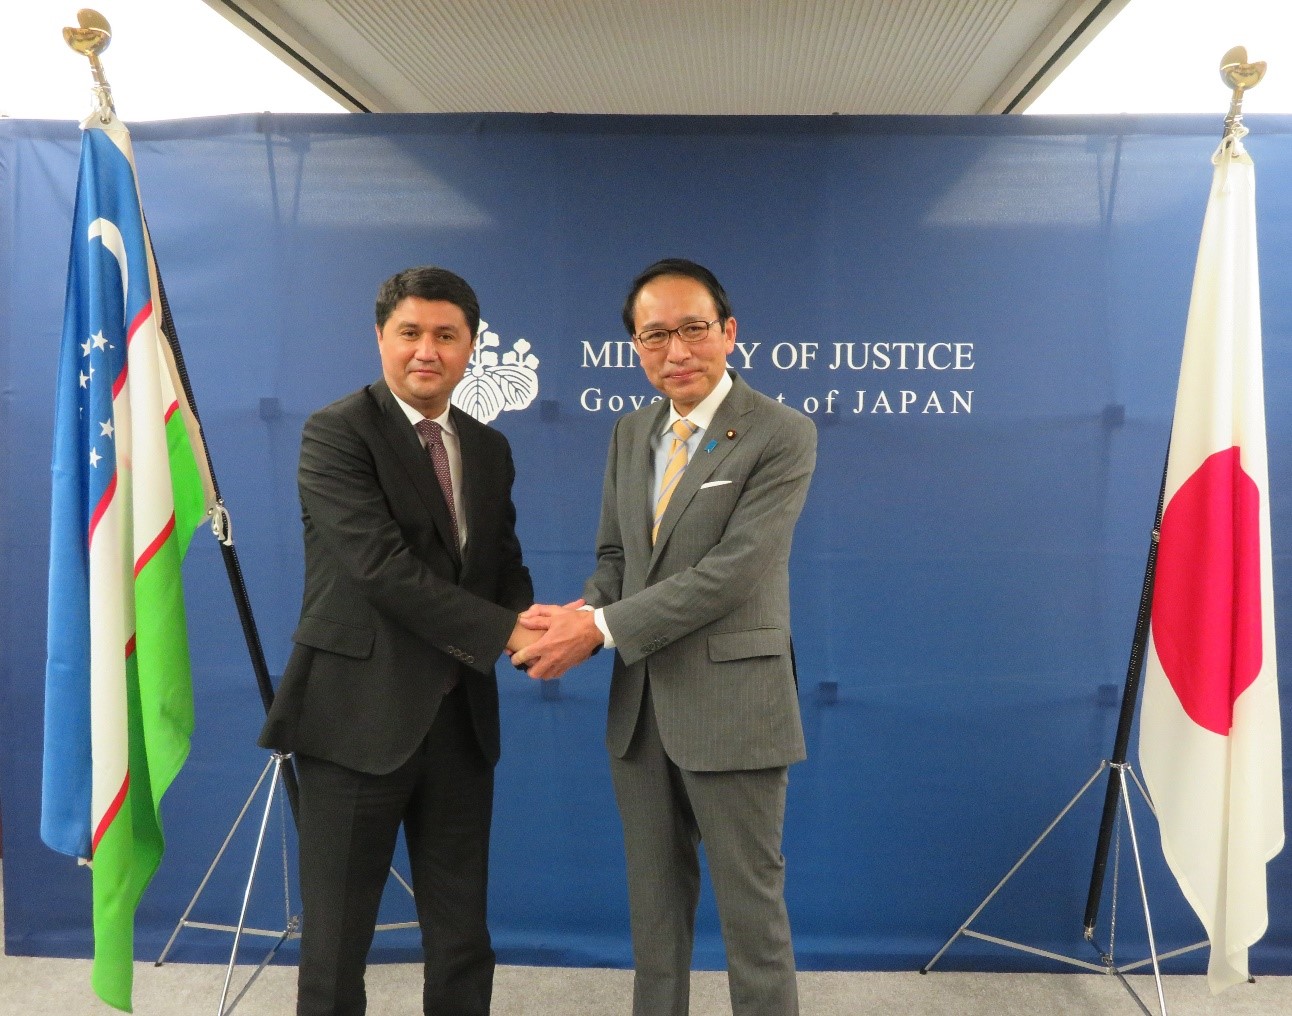 September 28, 2022 Courtesy Visit to the Minister of Justice by the Director of the Anti-Corruption Agency of the Republic of Uzbekistan